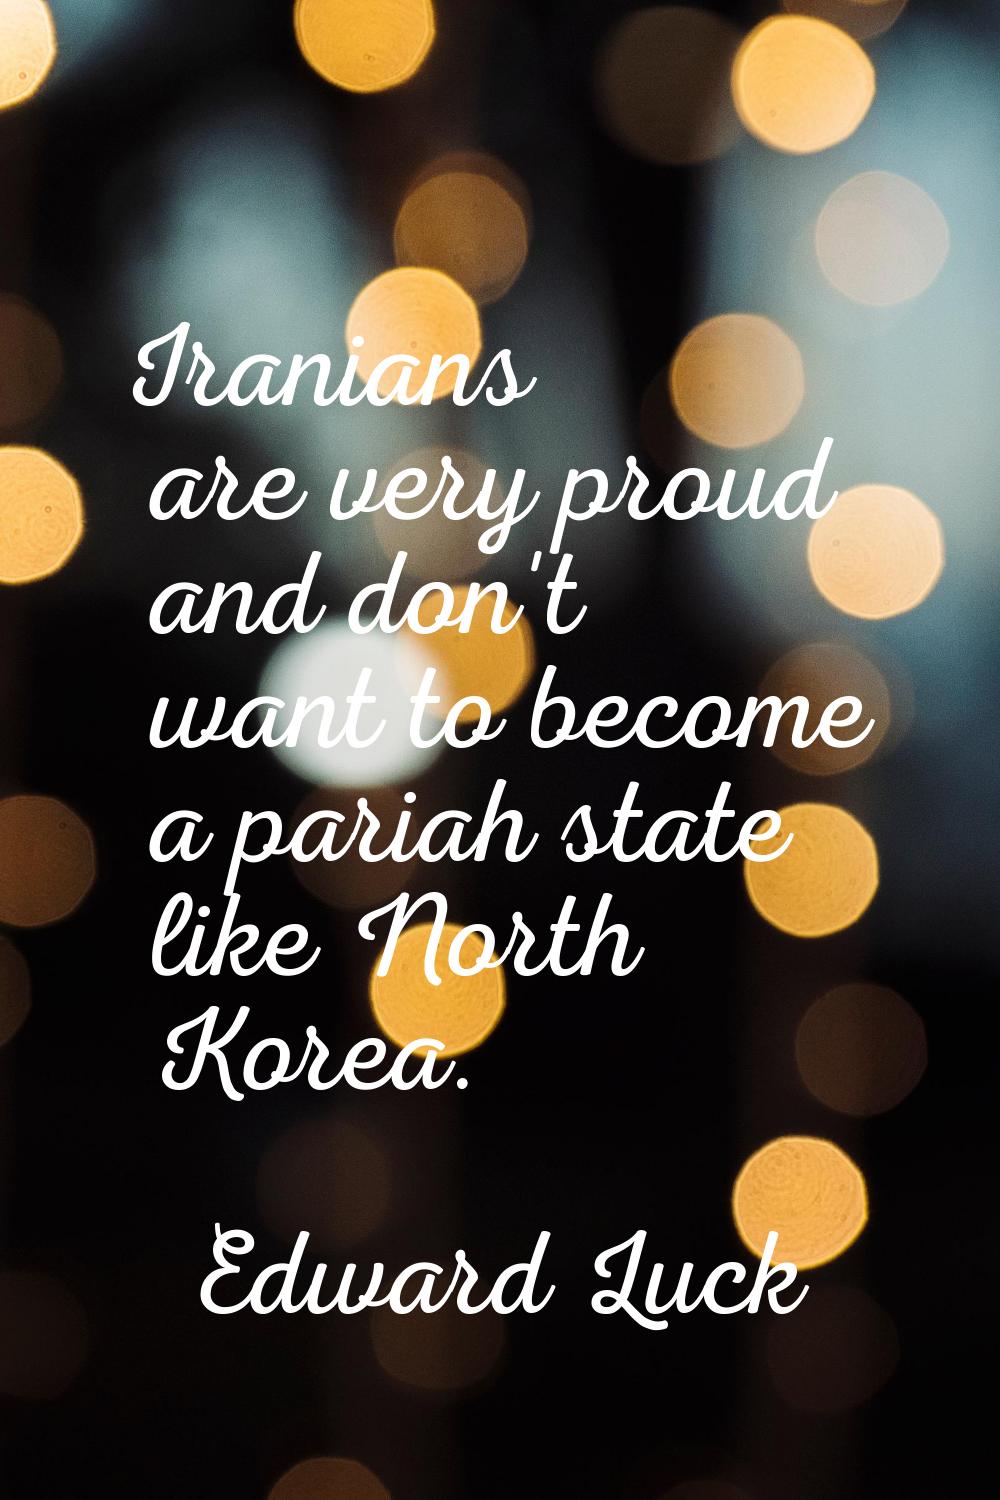 Iranians are very proud and don't want to become a pariah state like North Korea.